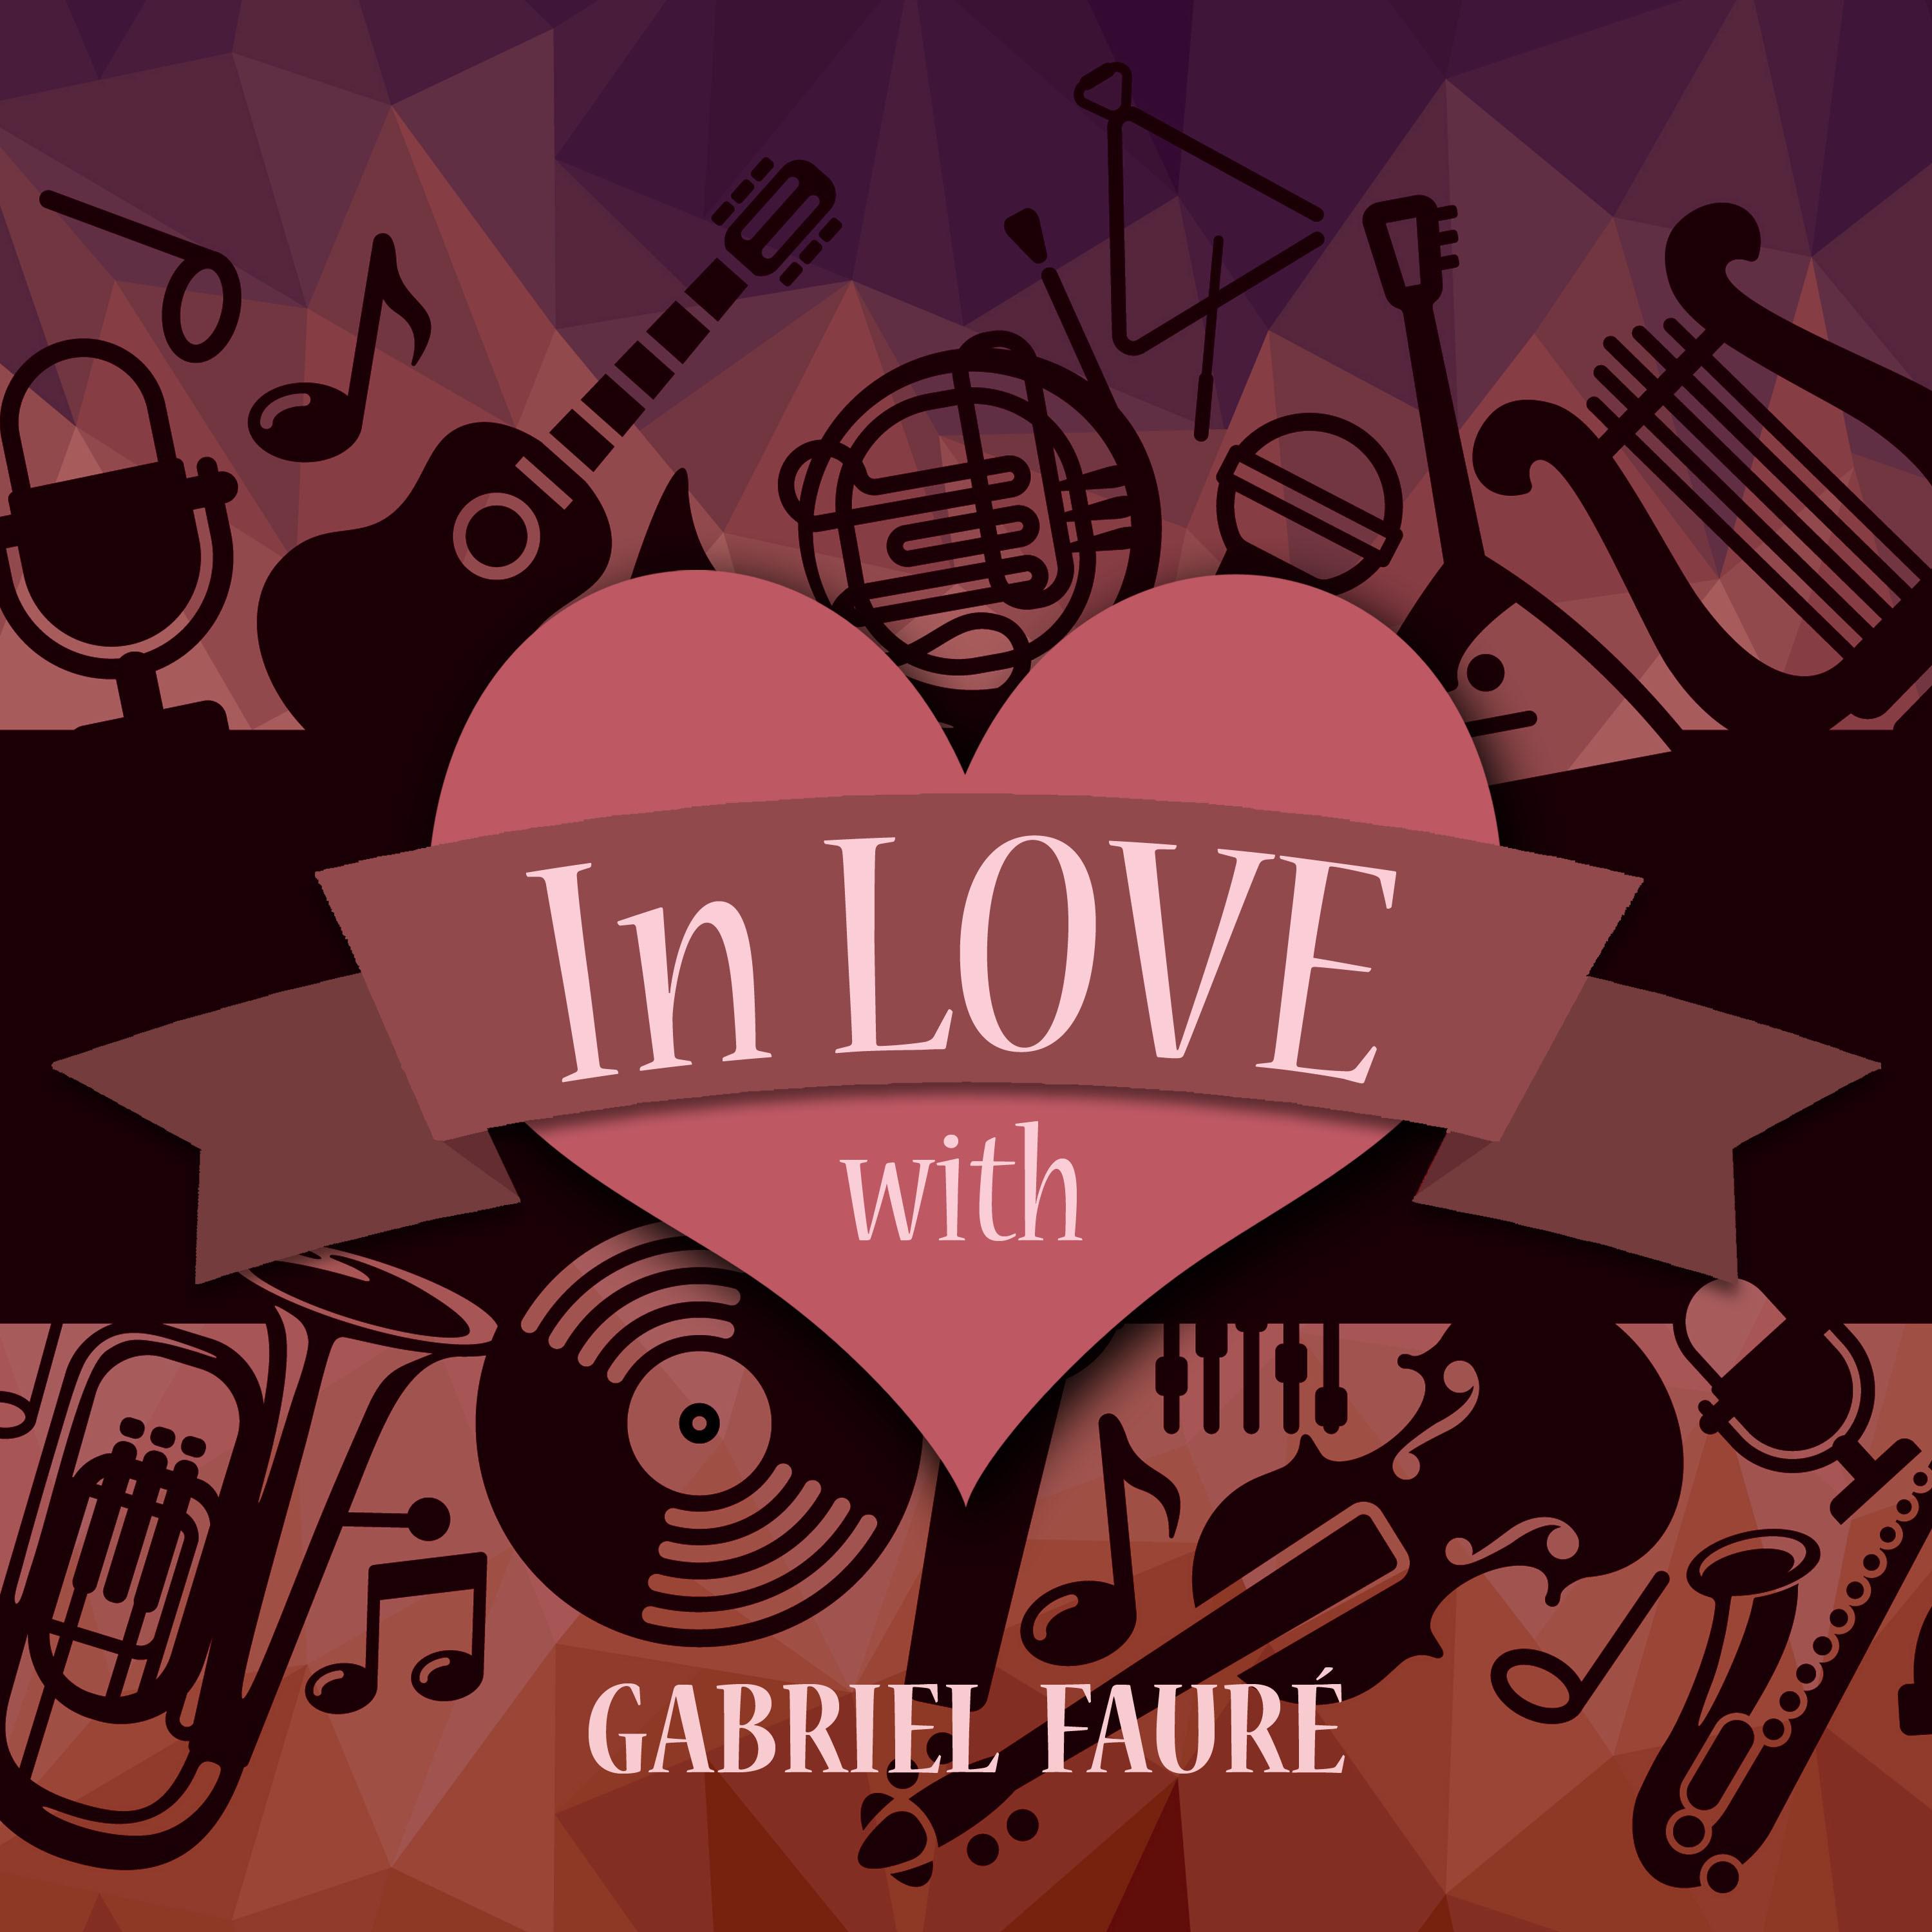 In Love with Gabriel Faure